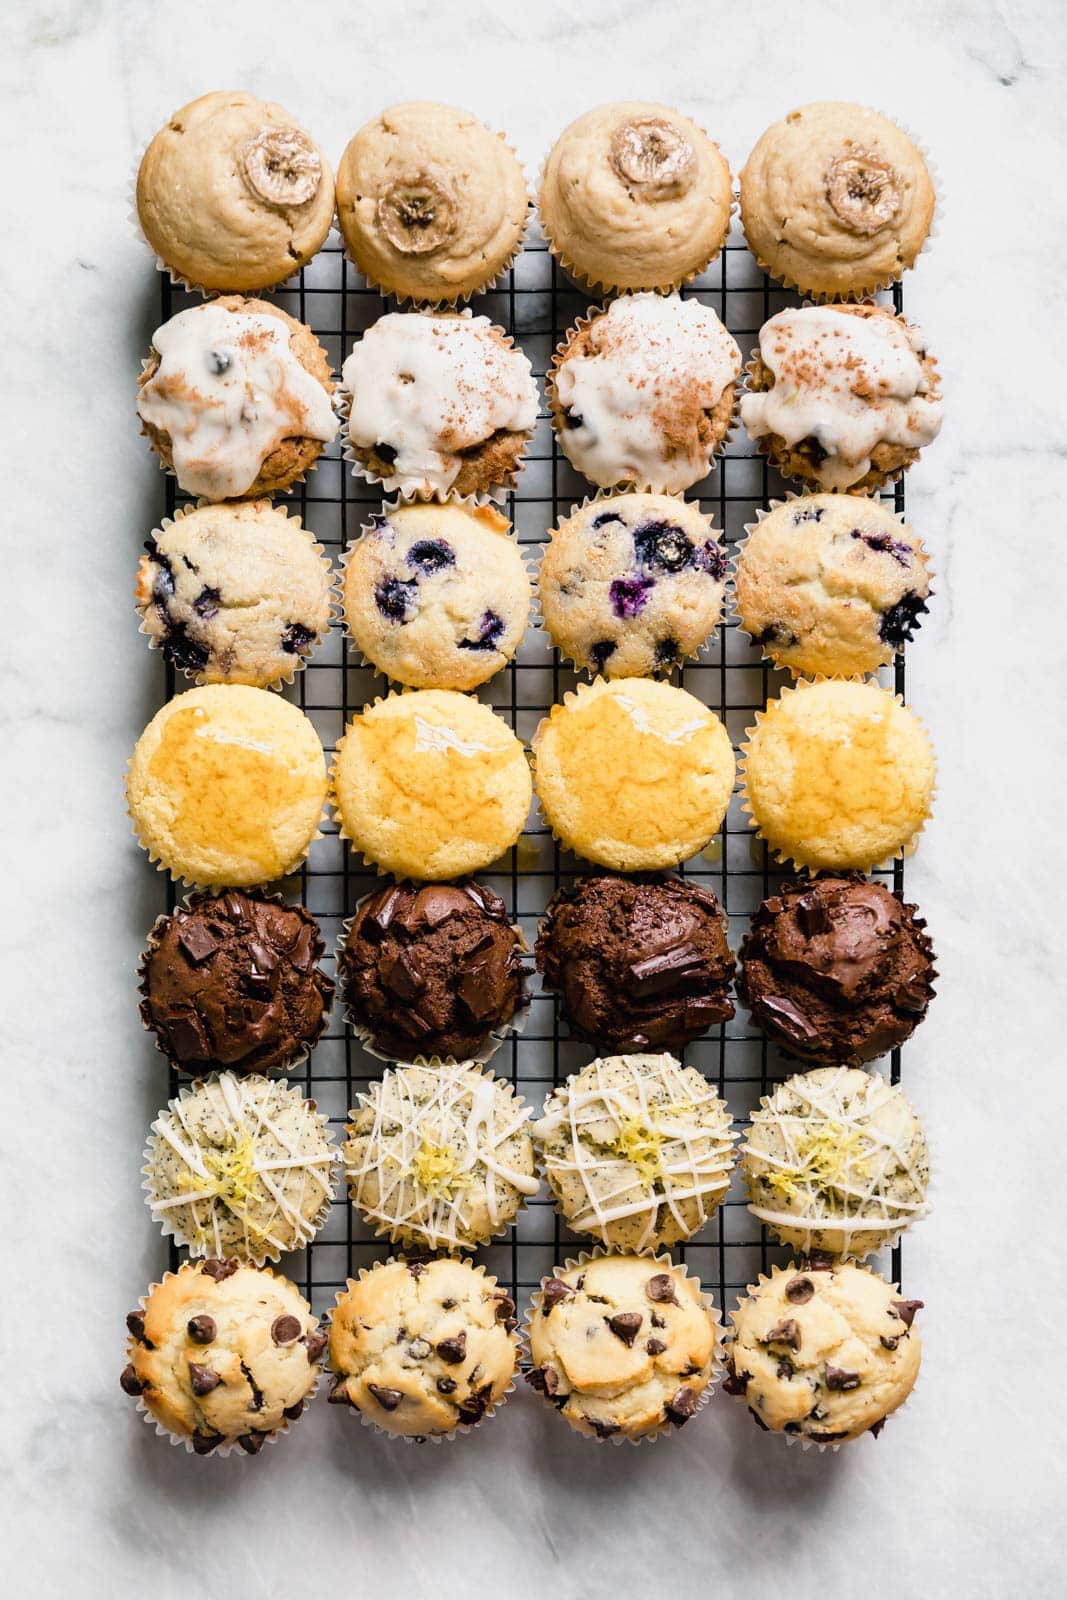 This Basic Muffin Recipe is anything but basic. This recipe is foolproof, with nearly unlimited variations from blueberry to cornmeal to gluten free & vegan